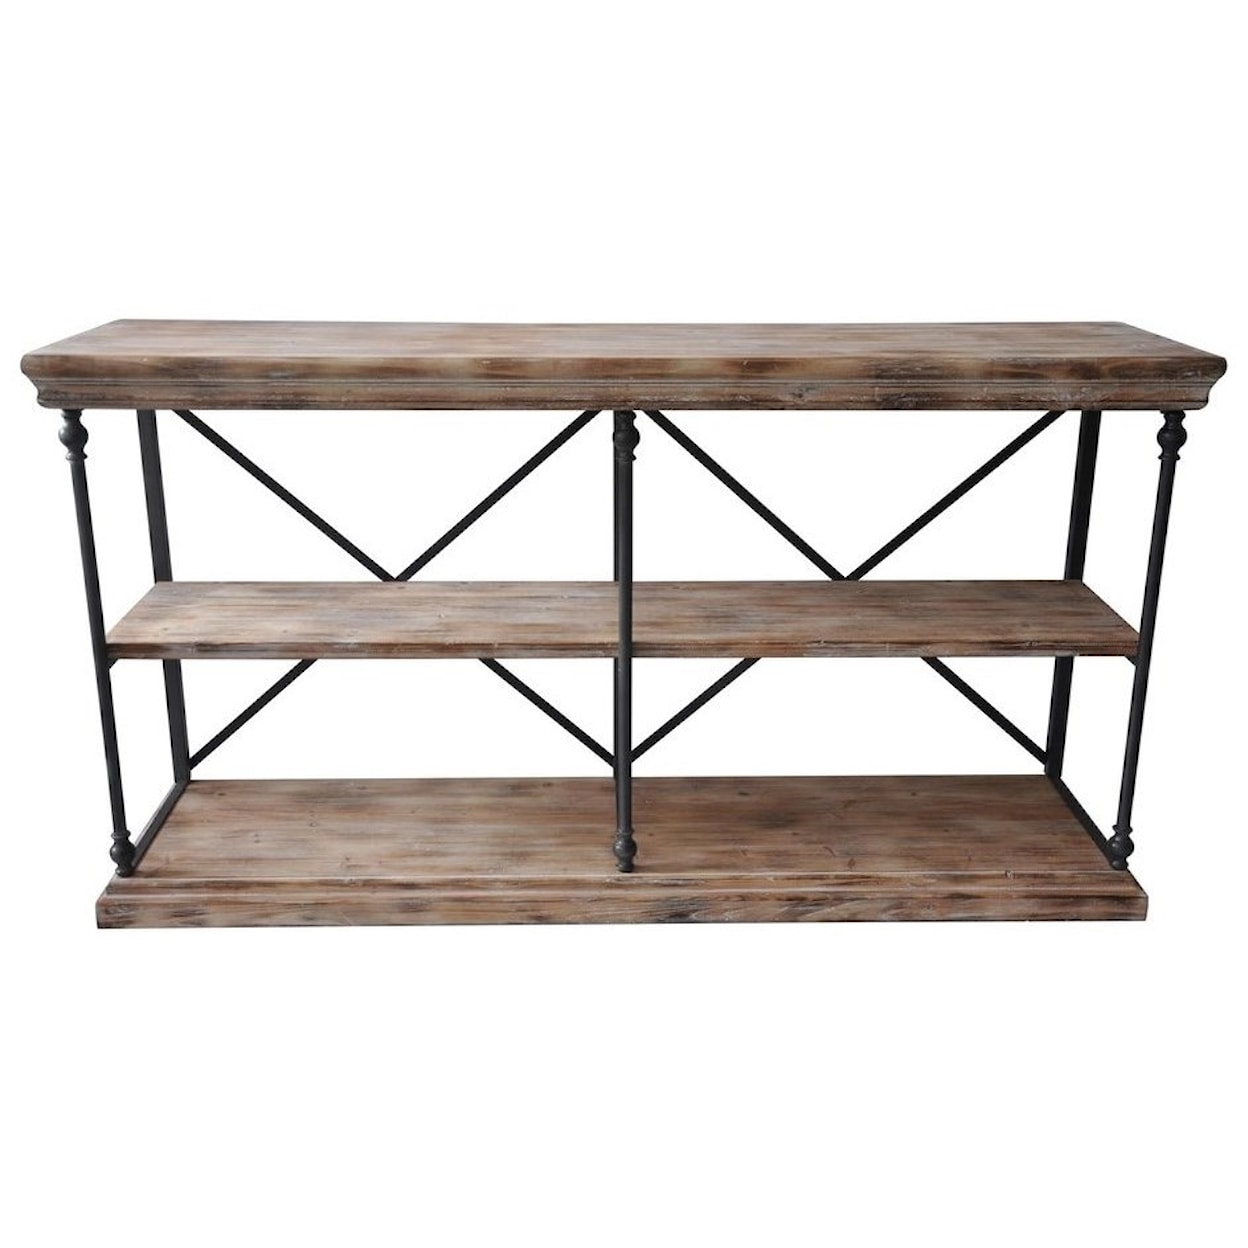 Crestview Collection Accent Furniture La Salle Metal And Wood Console